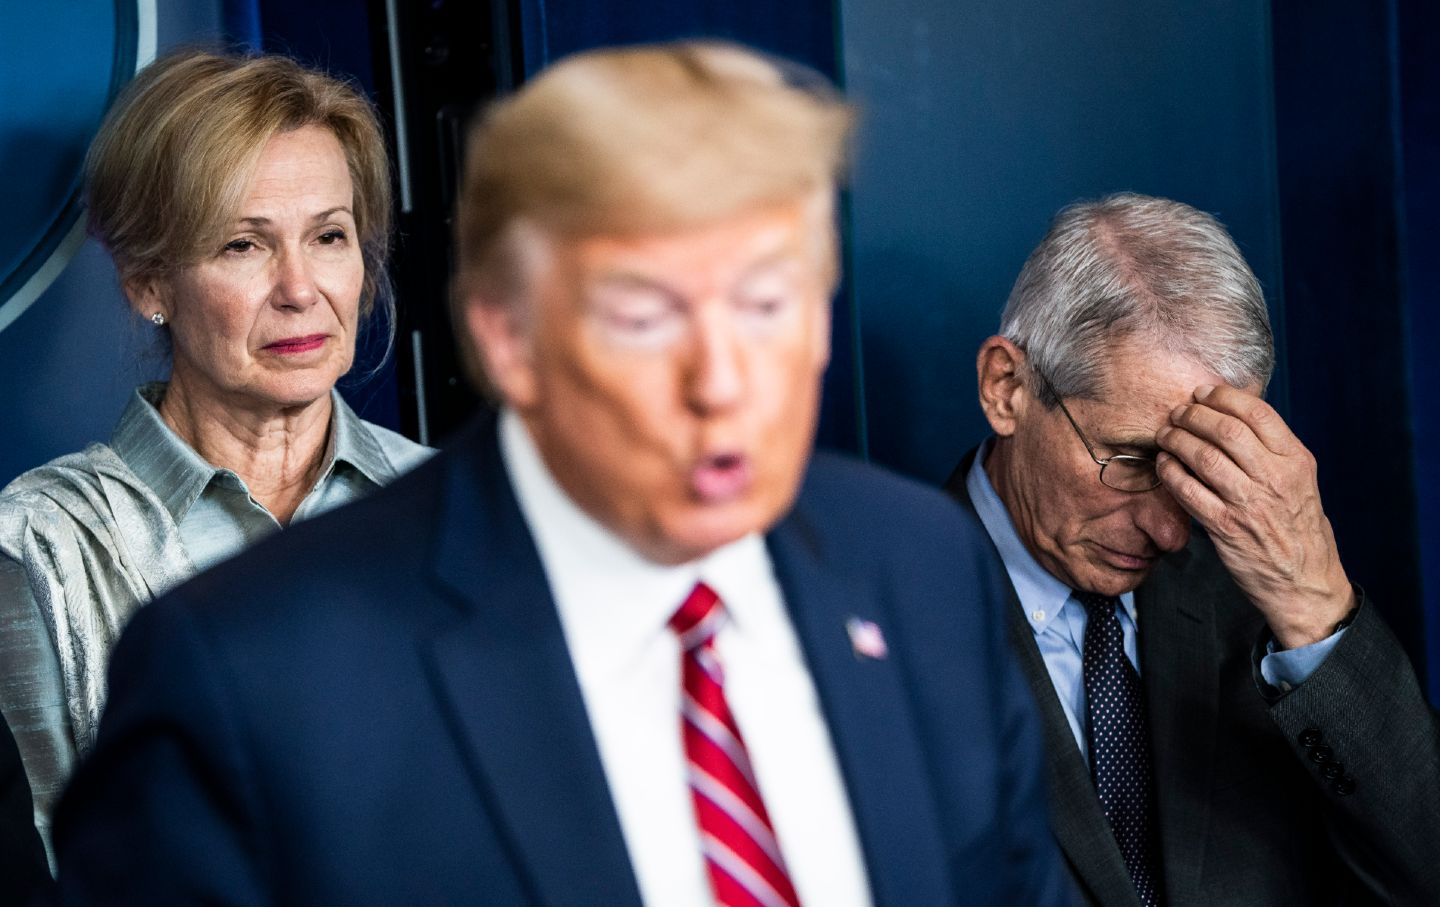 Donald Trump speaks while Dr. Anthony Fauci holds his head and looks down an Dr. Deborah Birx looks displeased